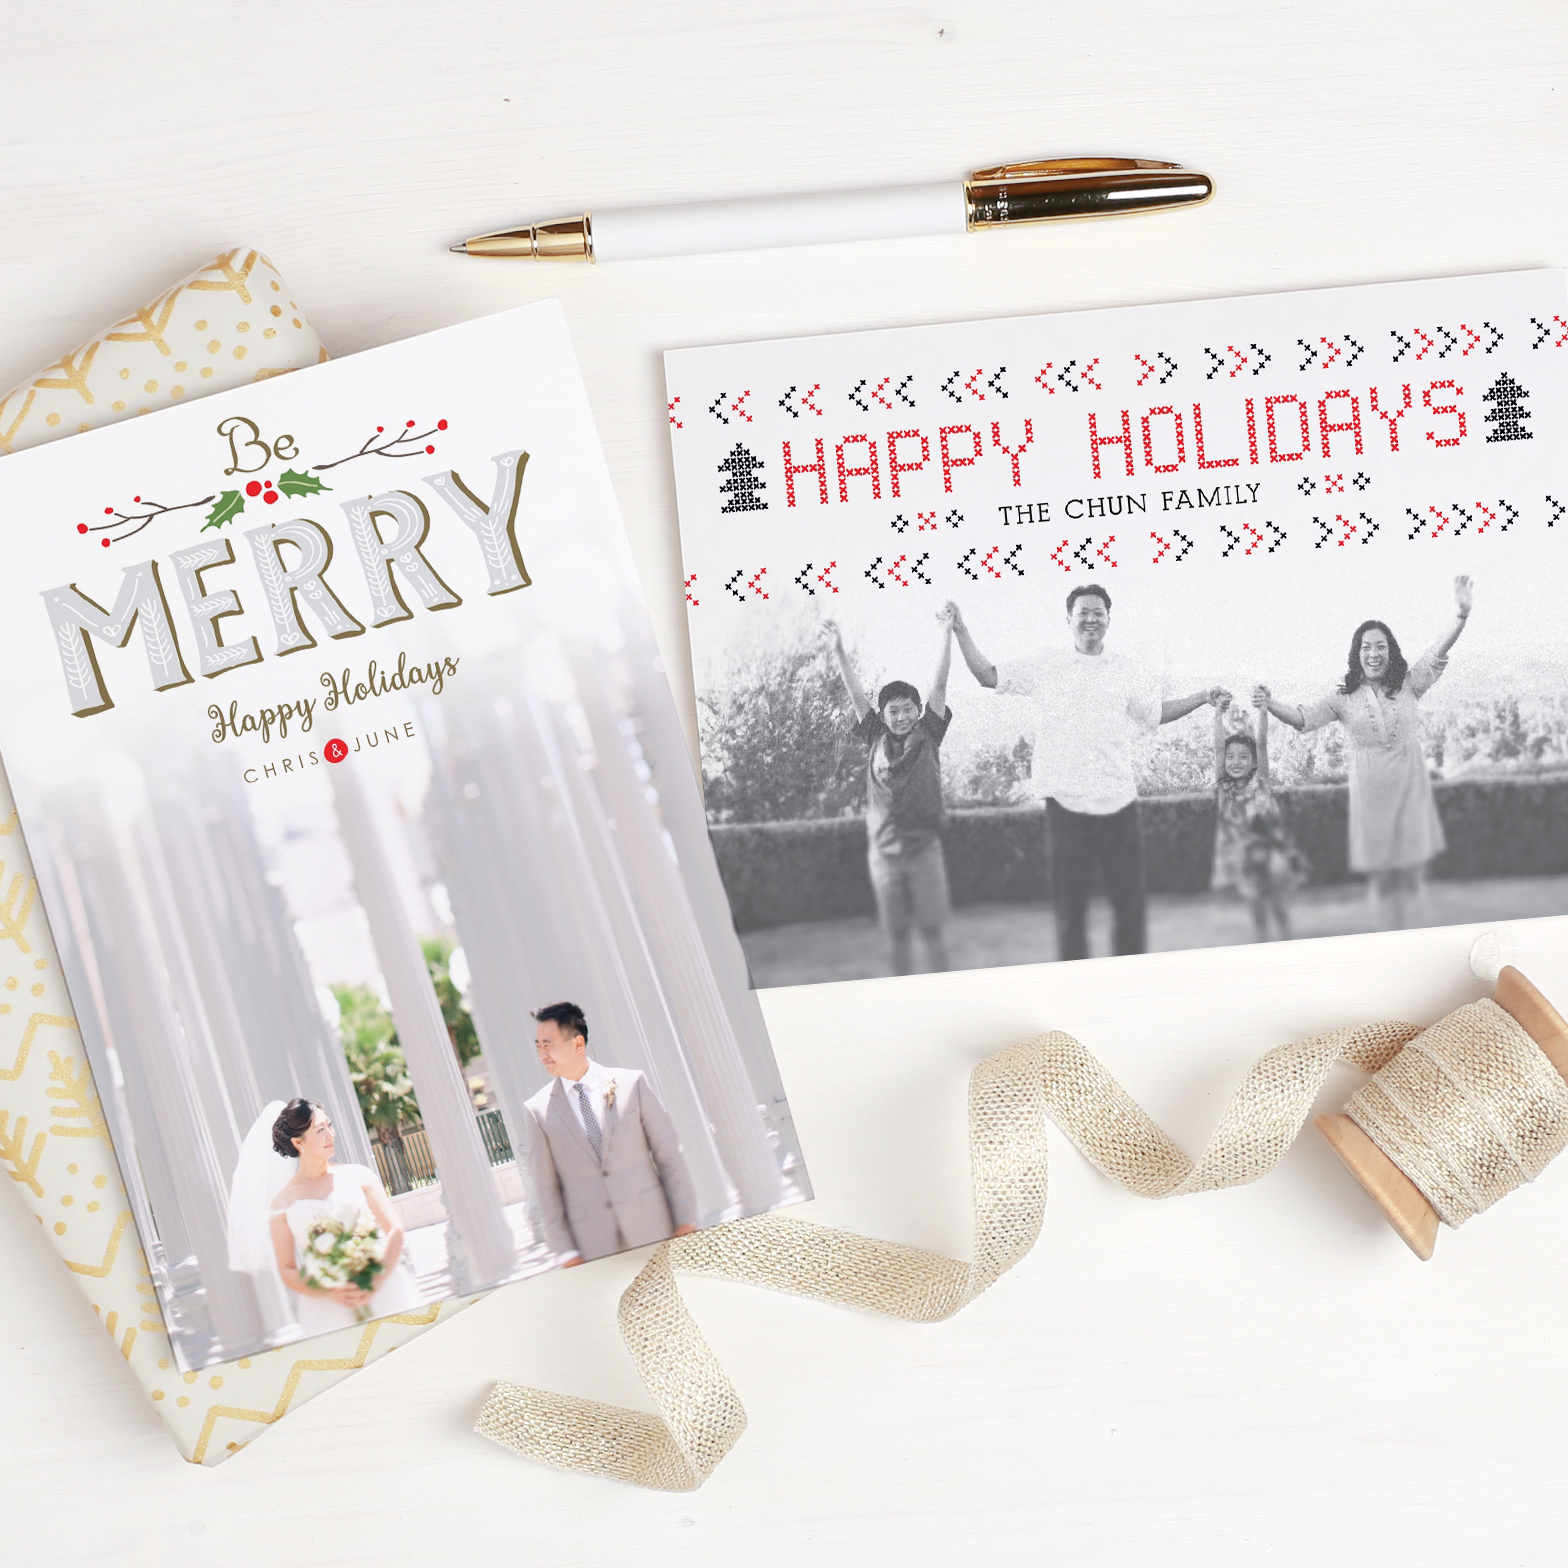 5 Perfect Outdoor Photo Ideas That Make Amazing Christmas Cards